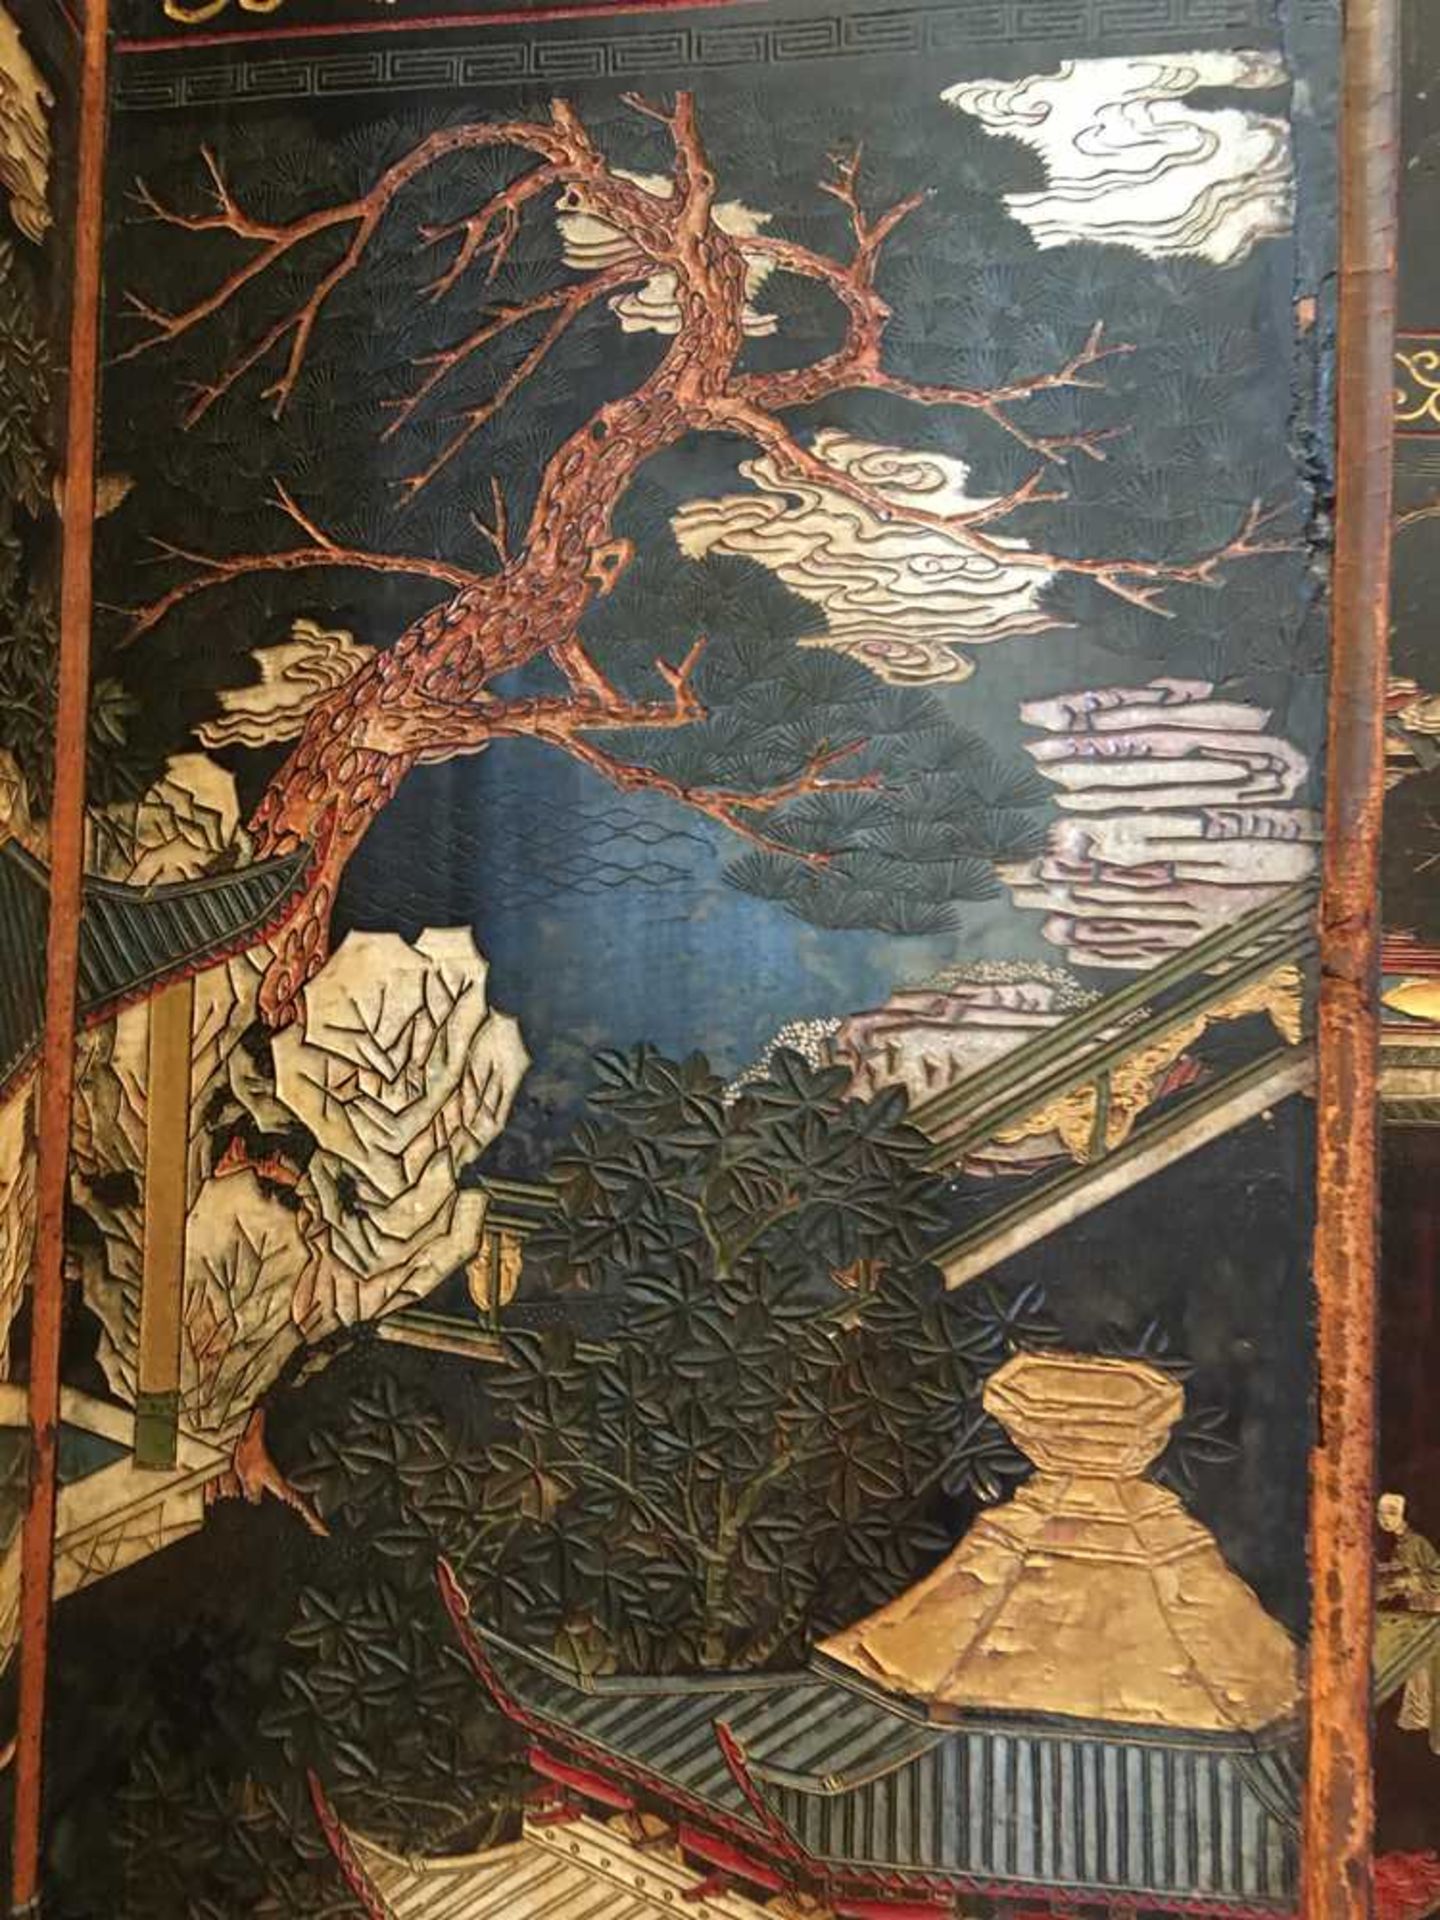 A CHINESE COROMANDEL BLACK LACQUER TWELVE-PANEL SCREEN QING DYNASTY, 18TH CENTURY - Image 18 of 72